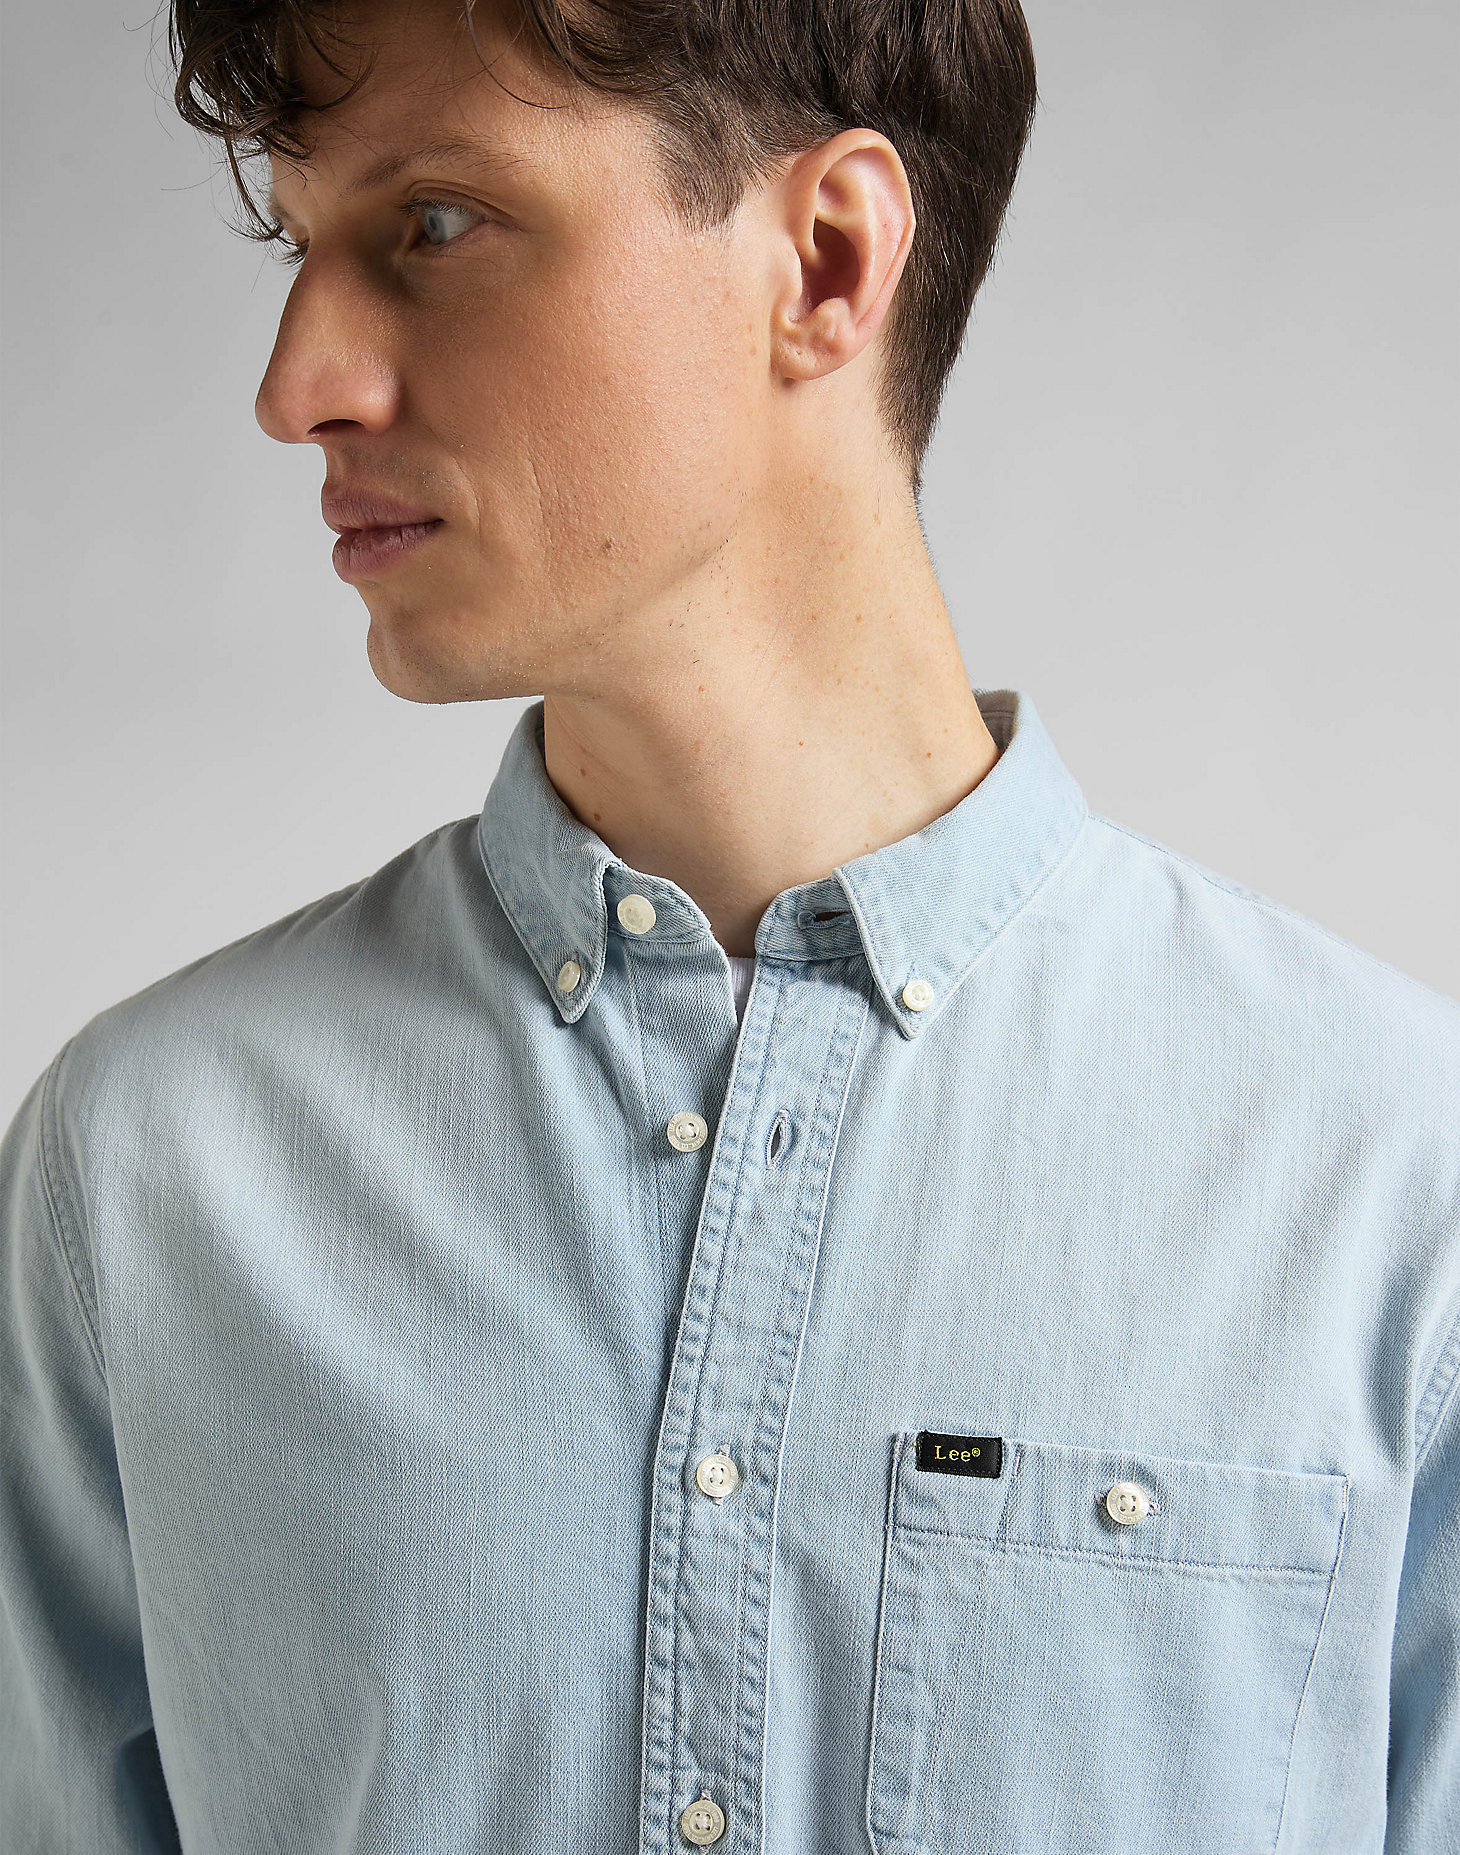 Riveted Shirt in Ice Blue alternative view 4